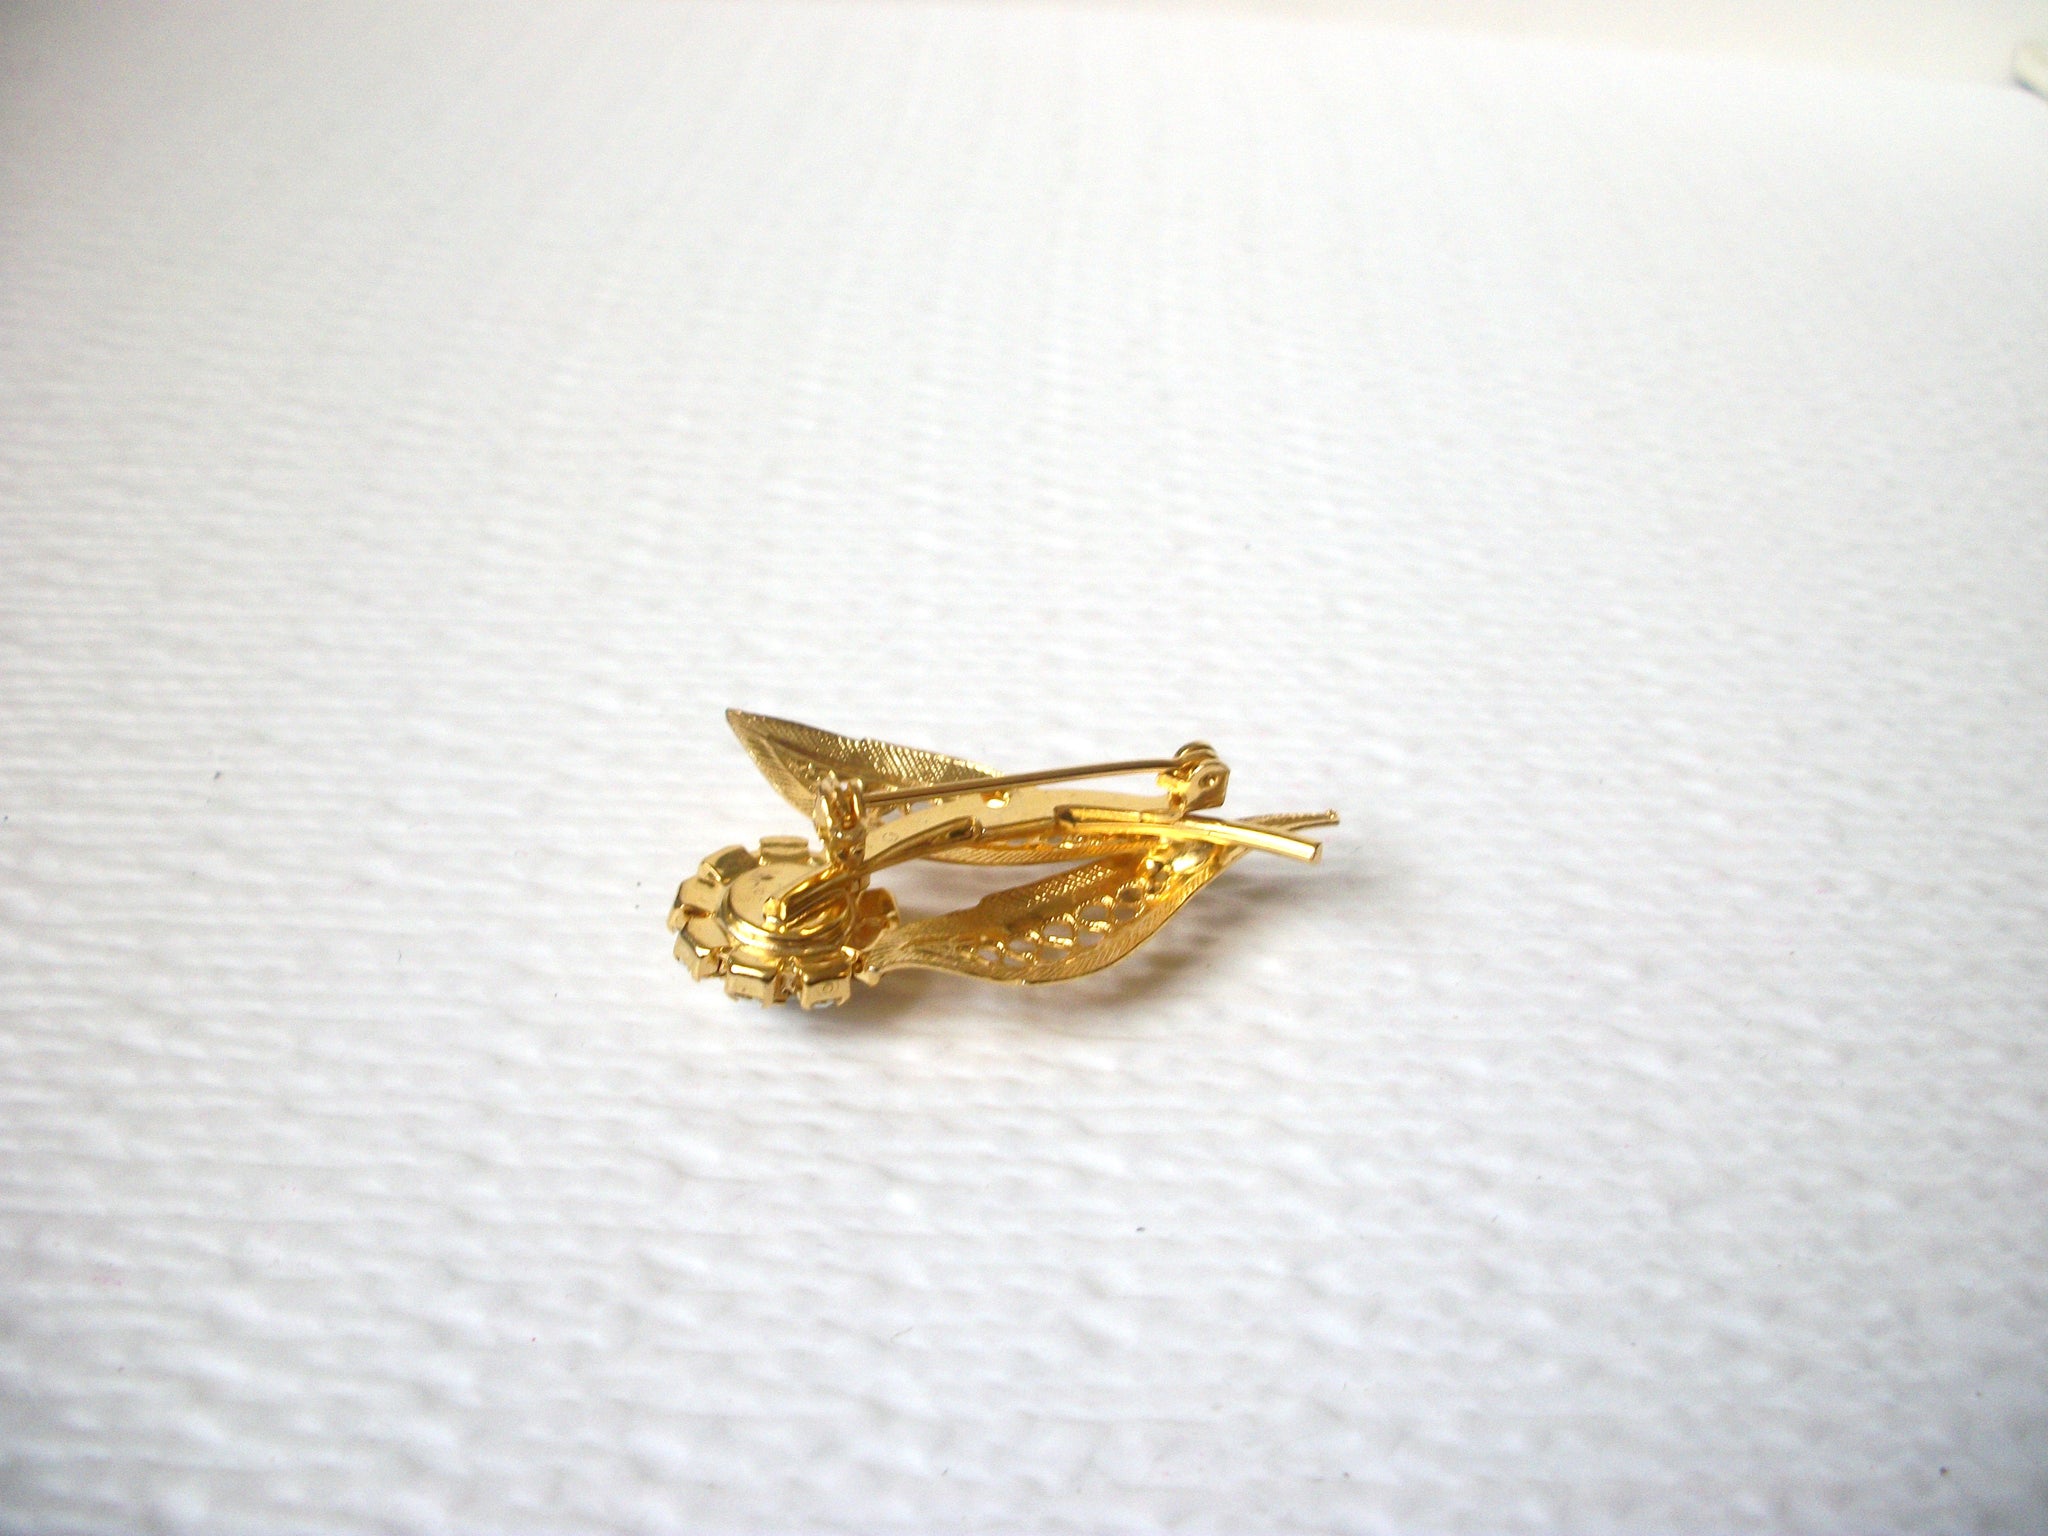 Vintage Gold White Floral Brooch Pin 113020